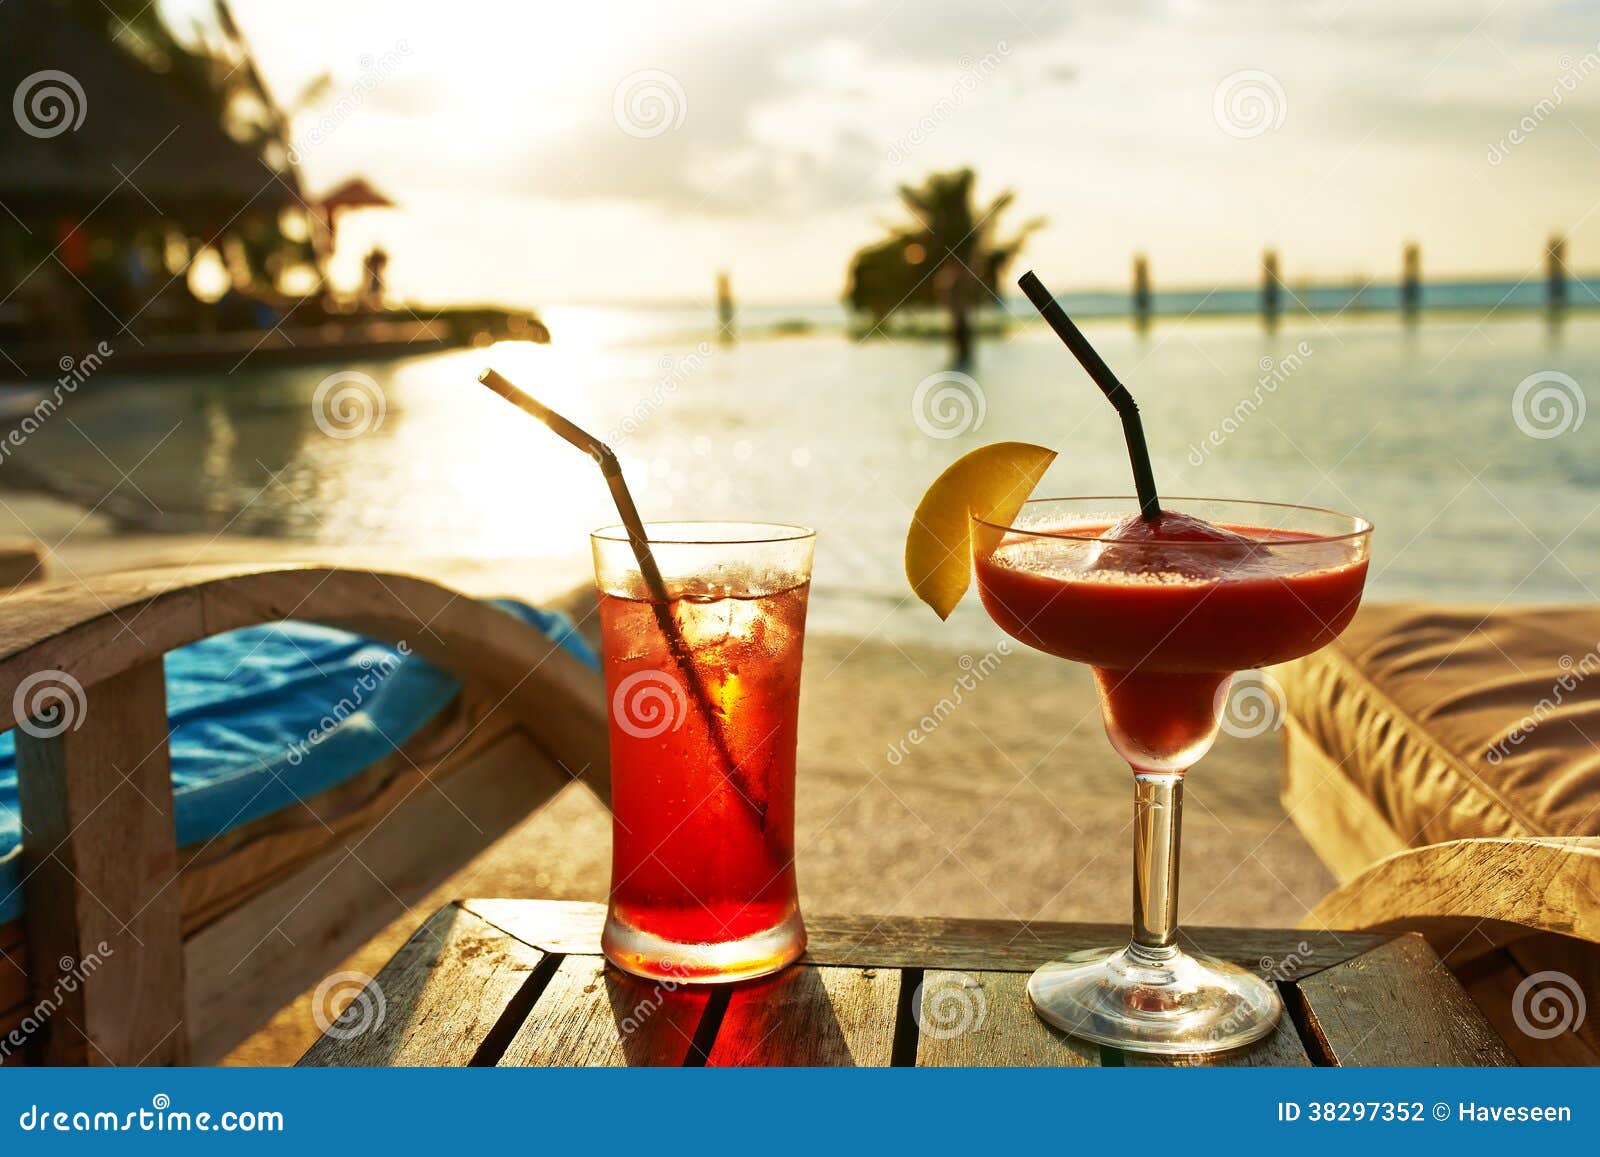 Cocktails Near Swimming Pool Stock Photo - Image of outdoors, resort ...